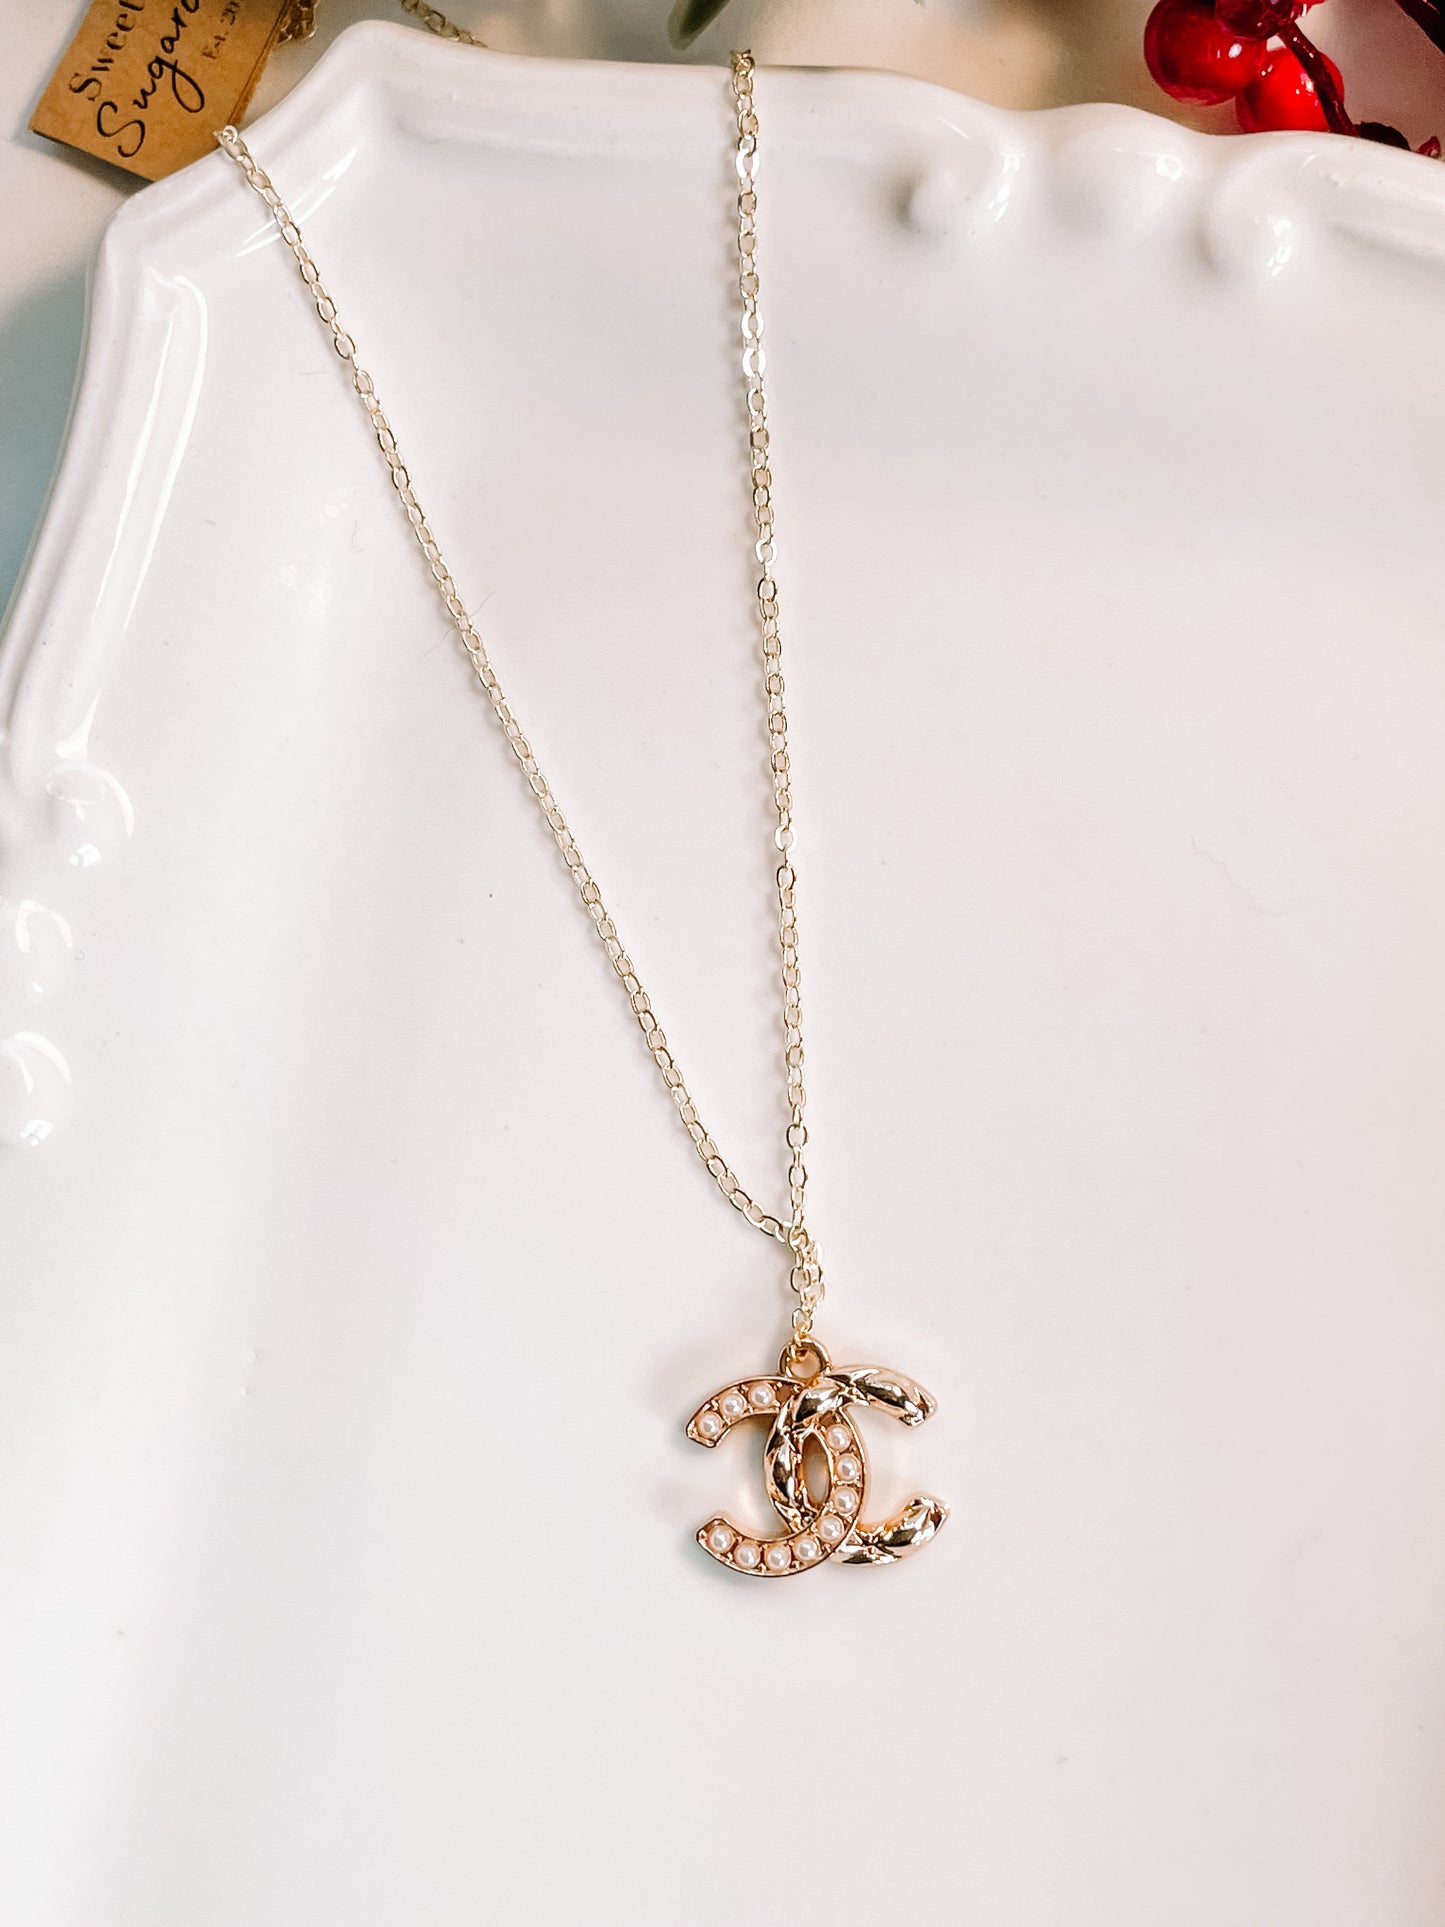 Chanel charm necklace